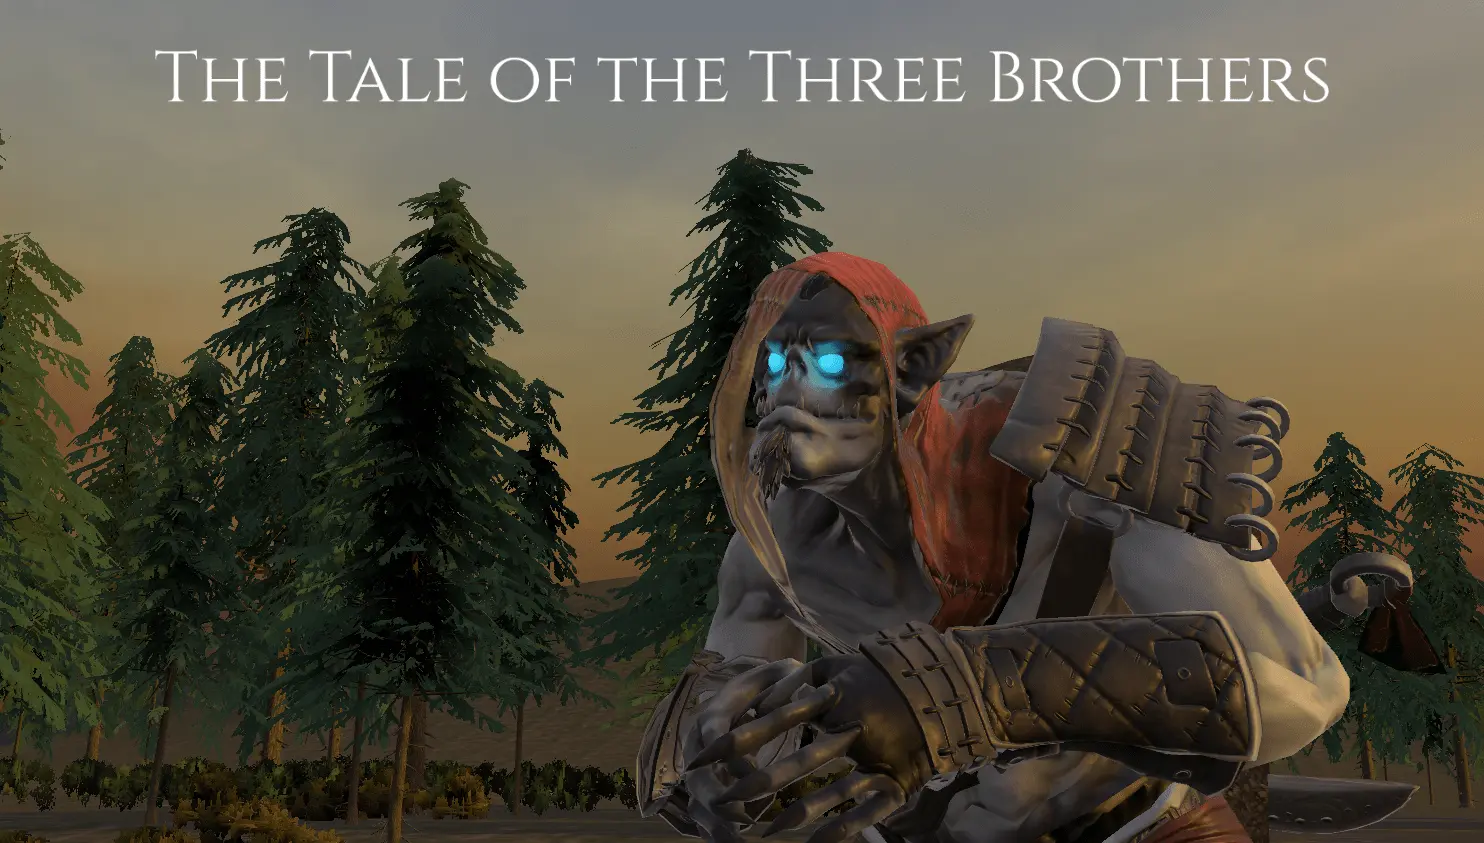 The Tale of the Three Brothers